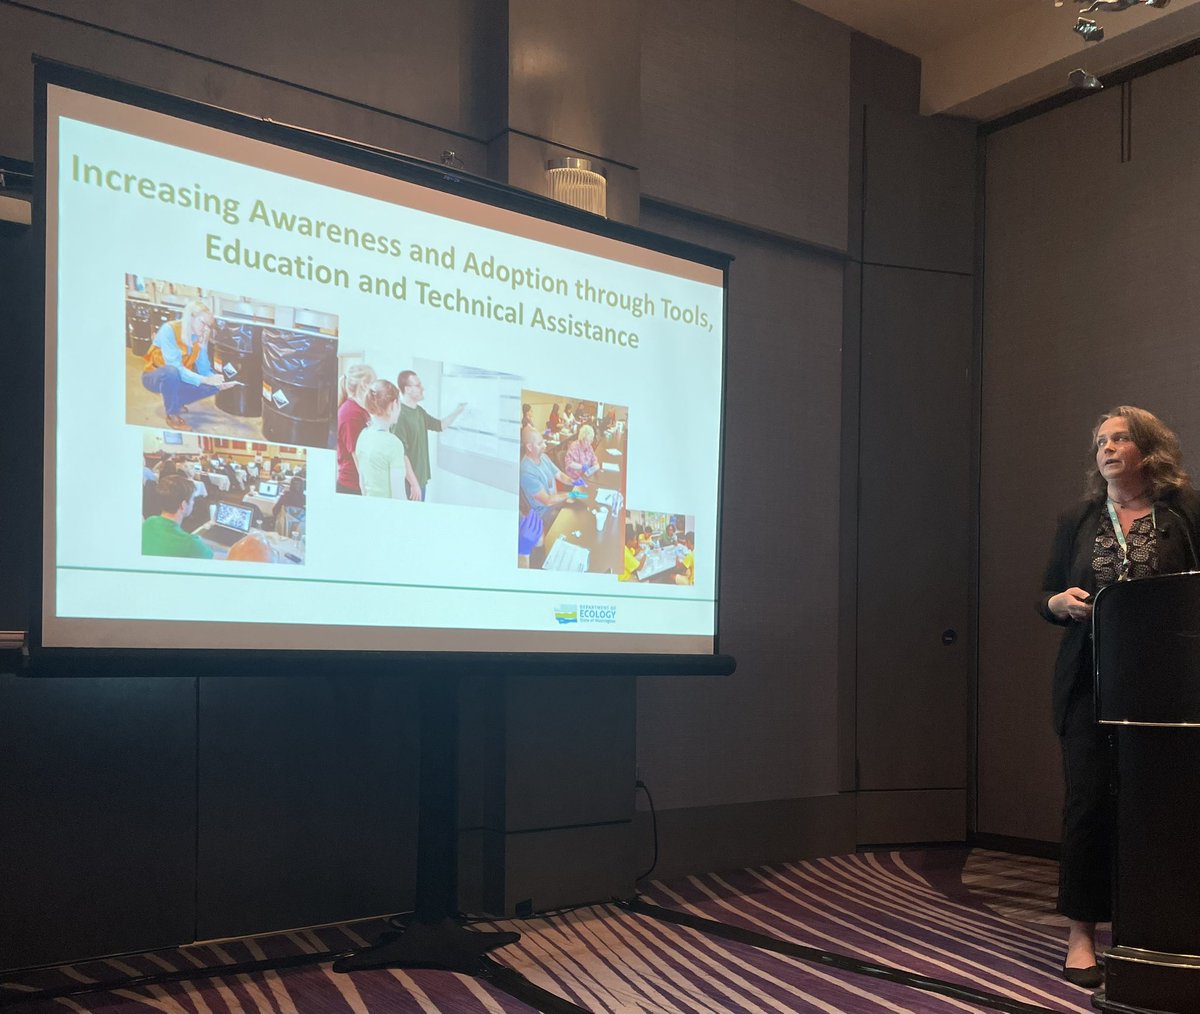 Now up the wonderful @Saskia_SvB sharing about the awareness building and adoption of #GreenChemistry education through tools and technical assistance from @EcologyWA for all. If you haven’t met Saskia you need to at #GCandE. She’s a walking resource and connector! @beyondbenign